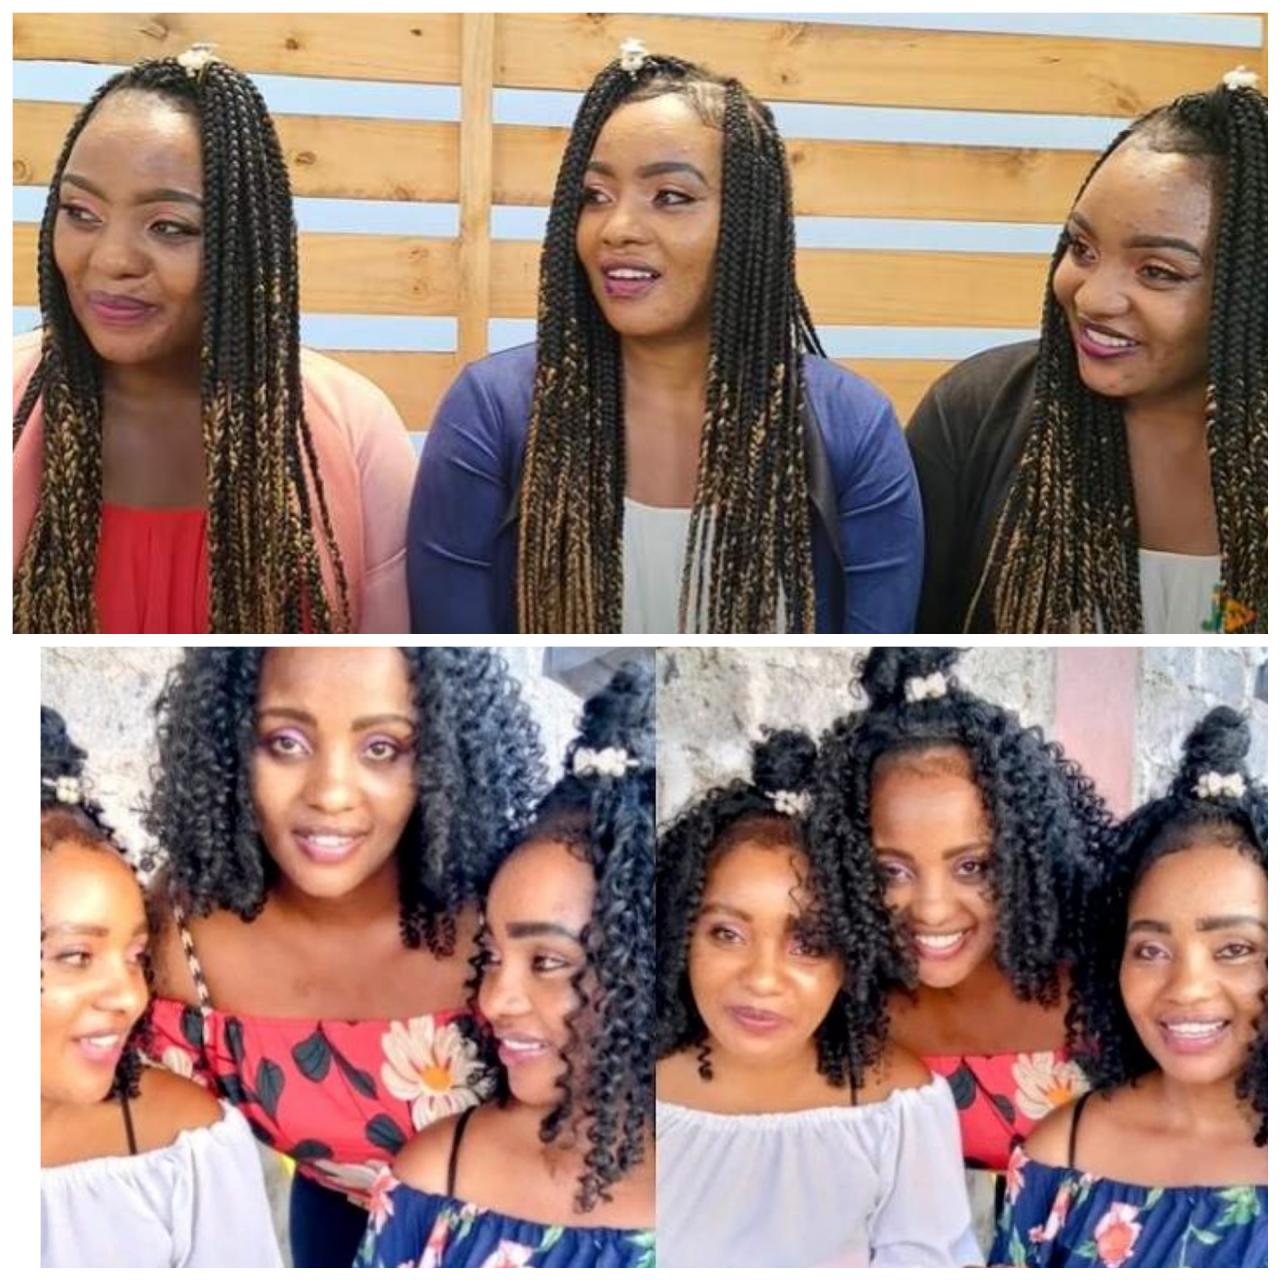 "We are planning to marry him"  - Identical Kenyan triplets reveal they are dating same man (video)